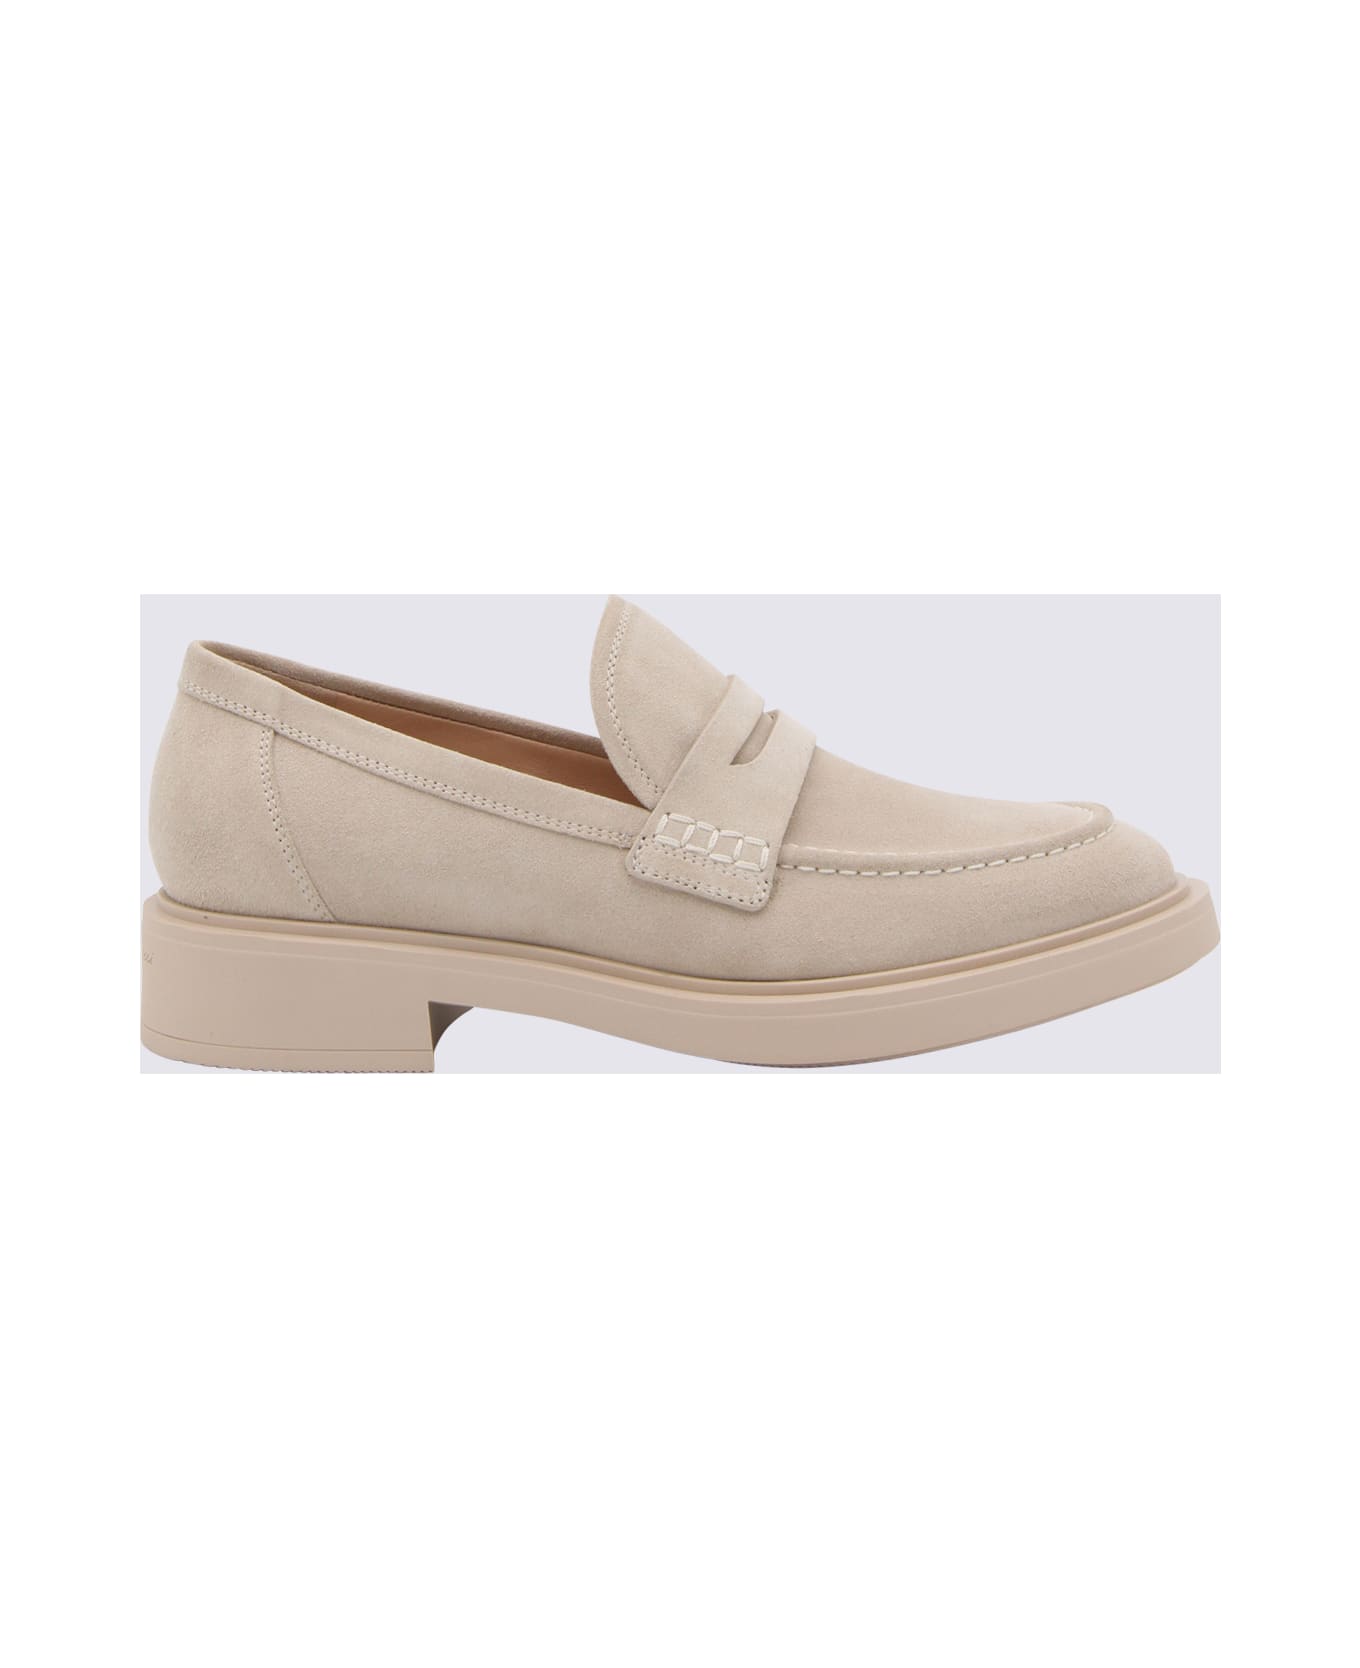 Gianvito Rossi Mousse Suede Loafers - Beige フラットシューズ